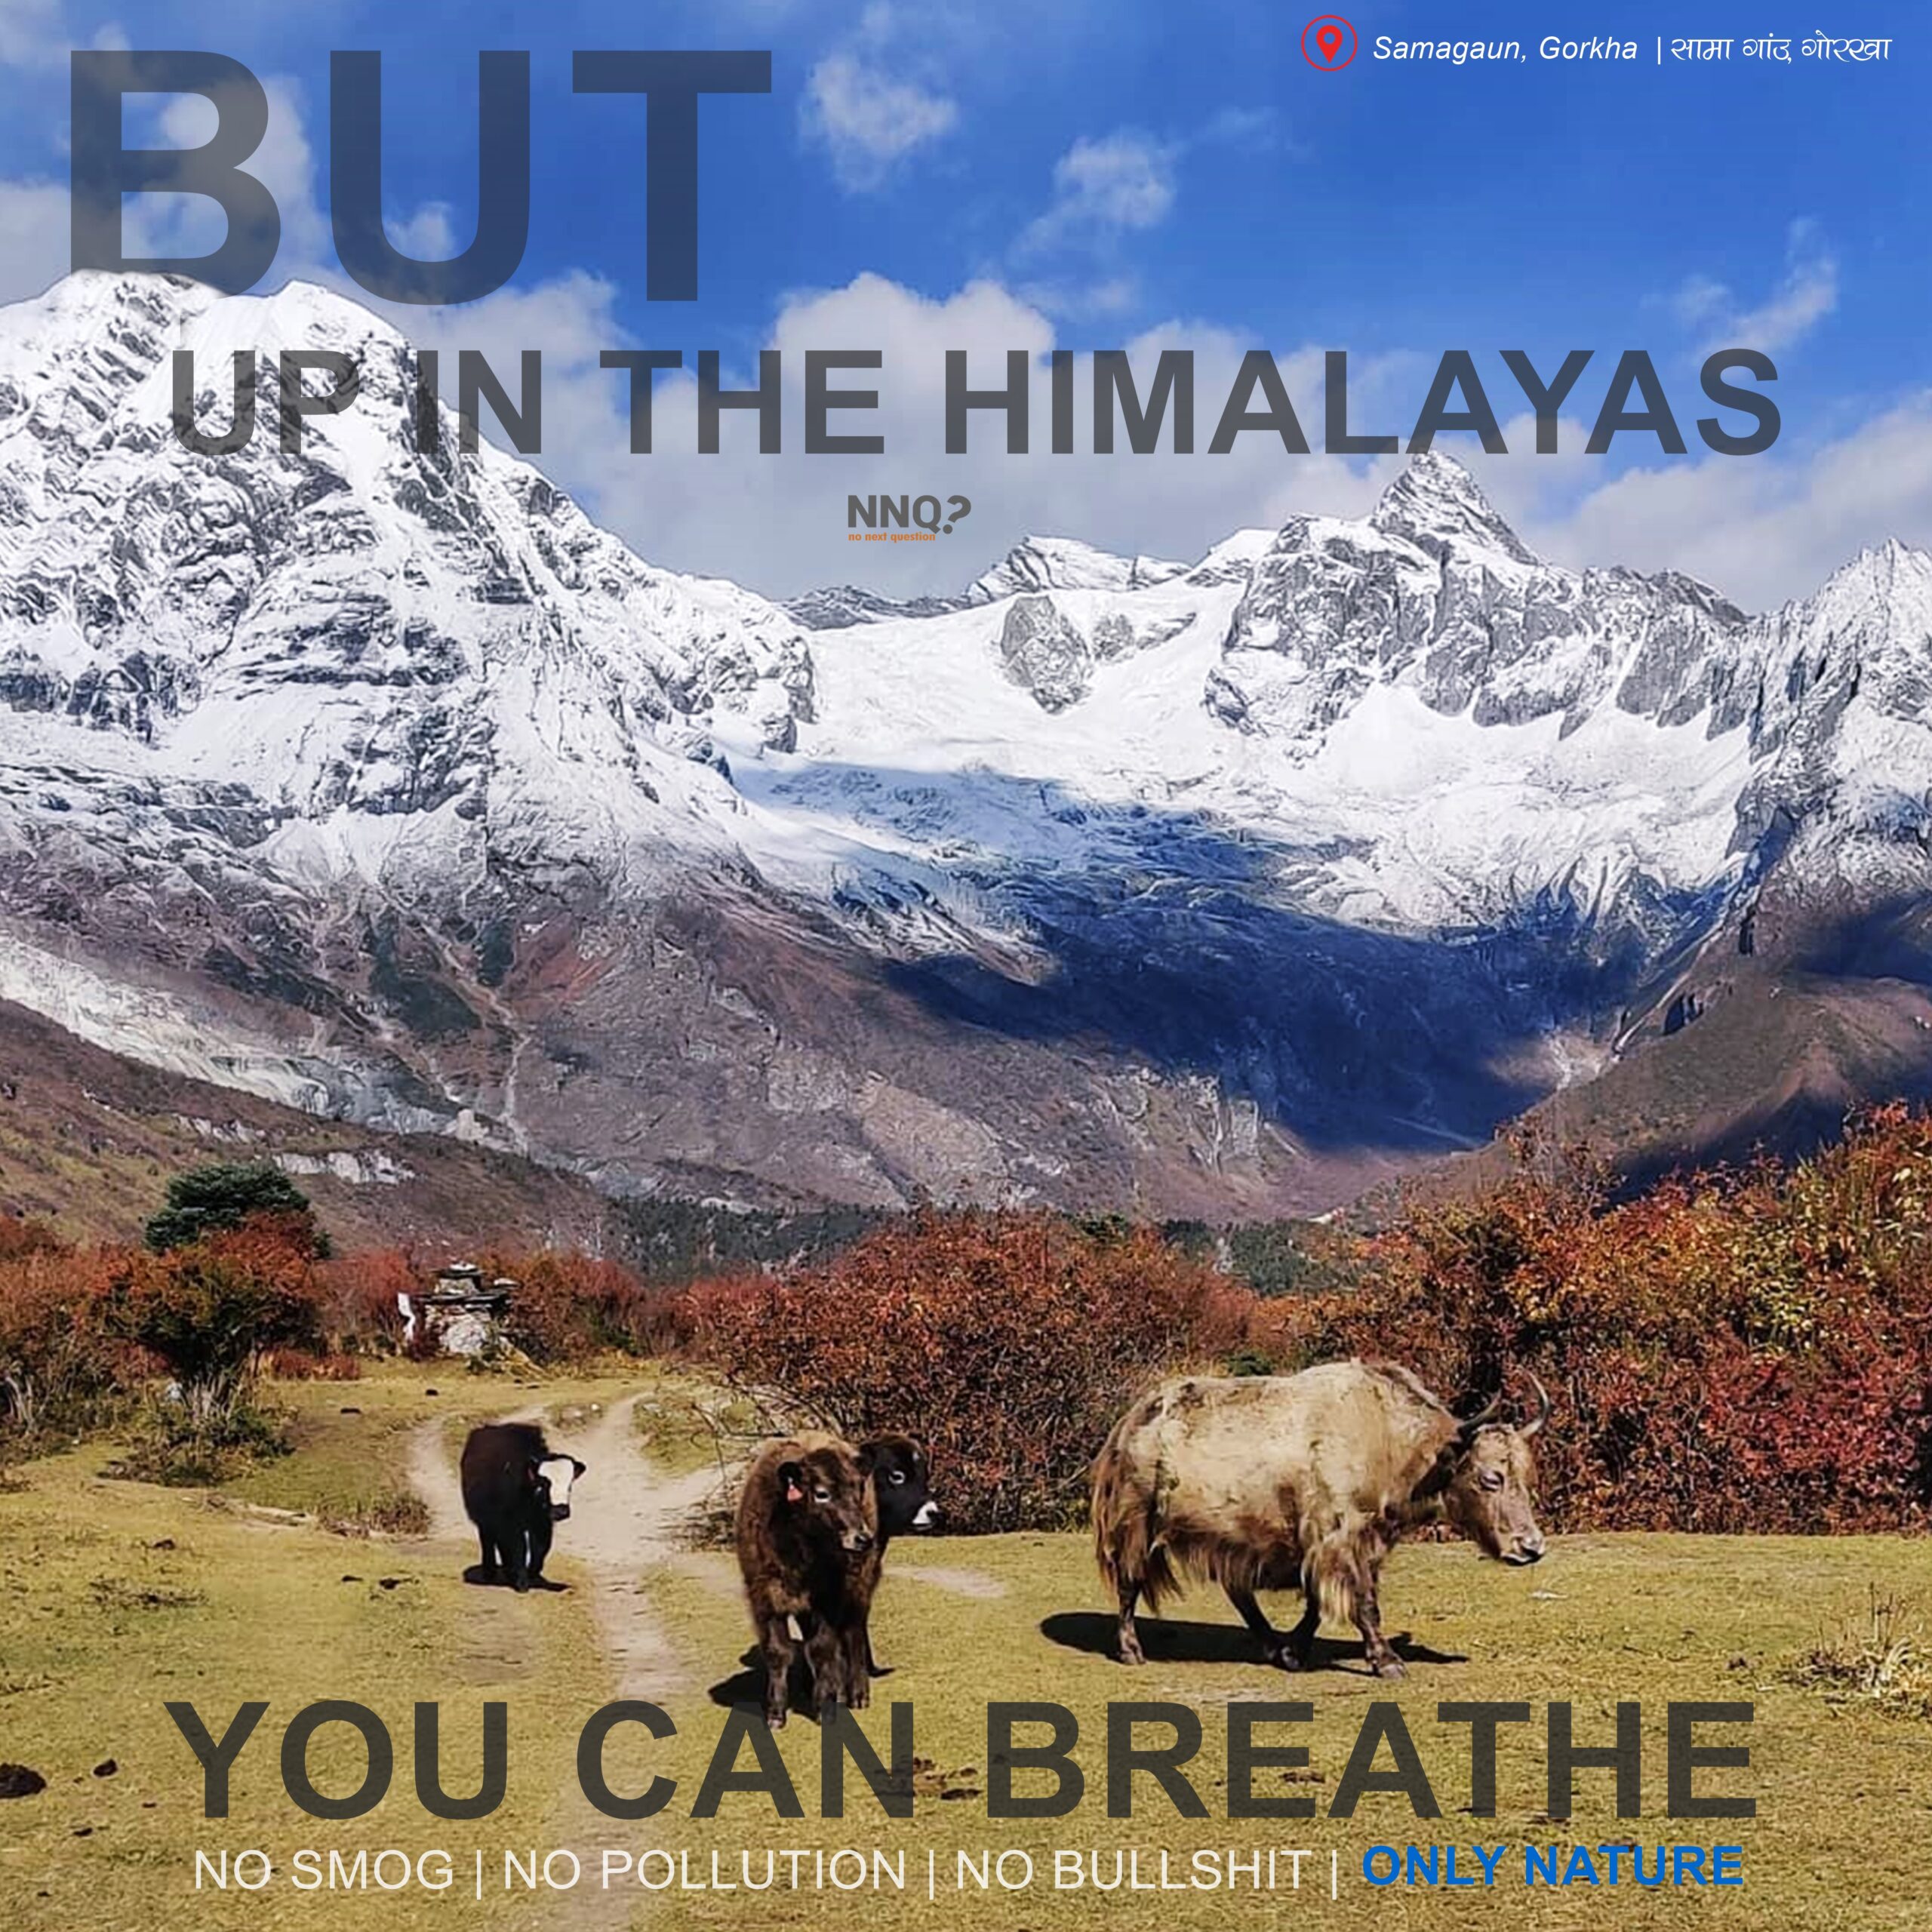 Up in the Himalayas, you can breathe